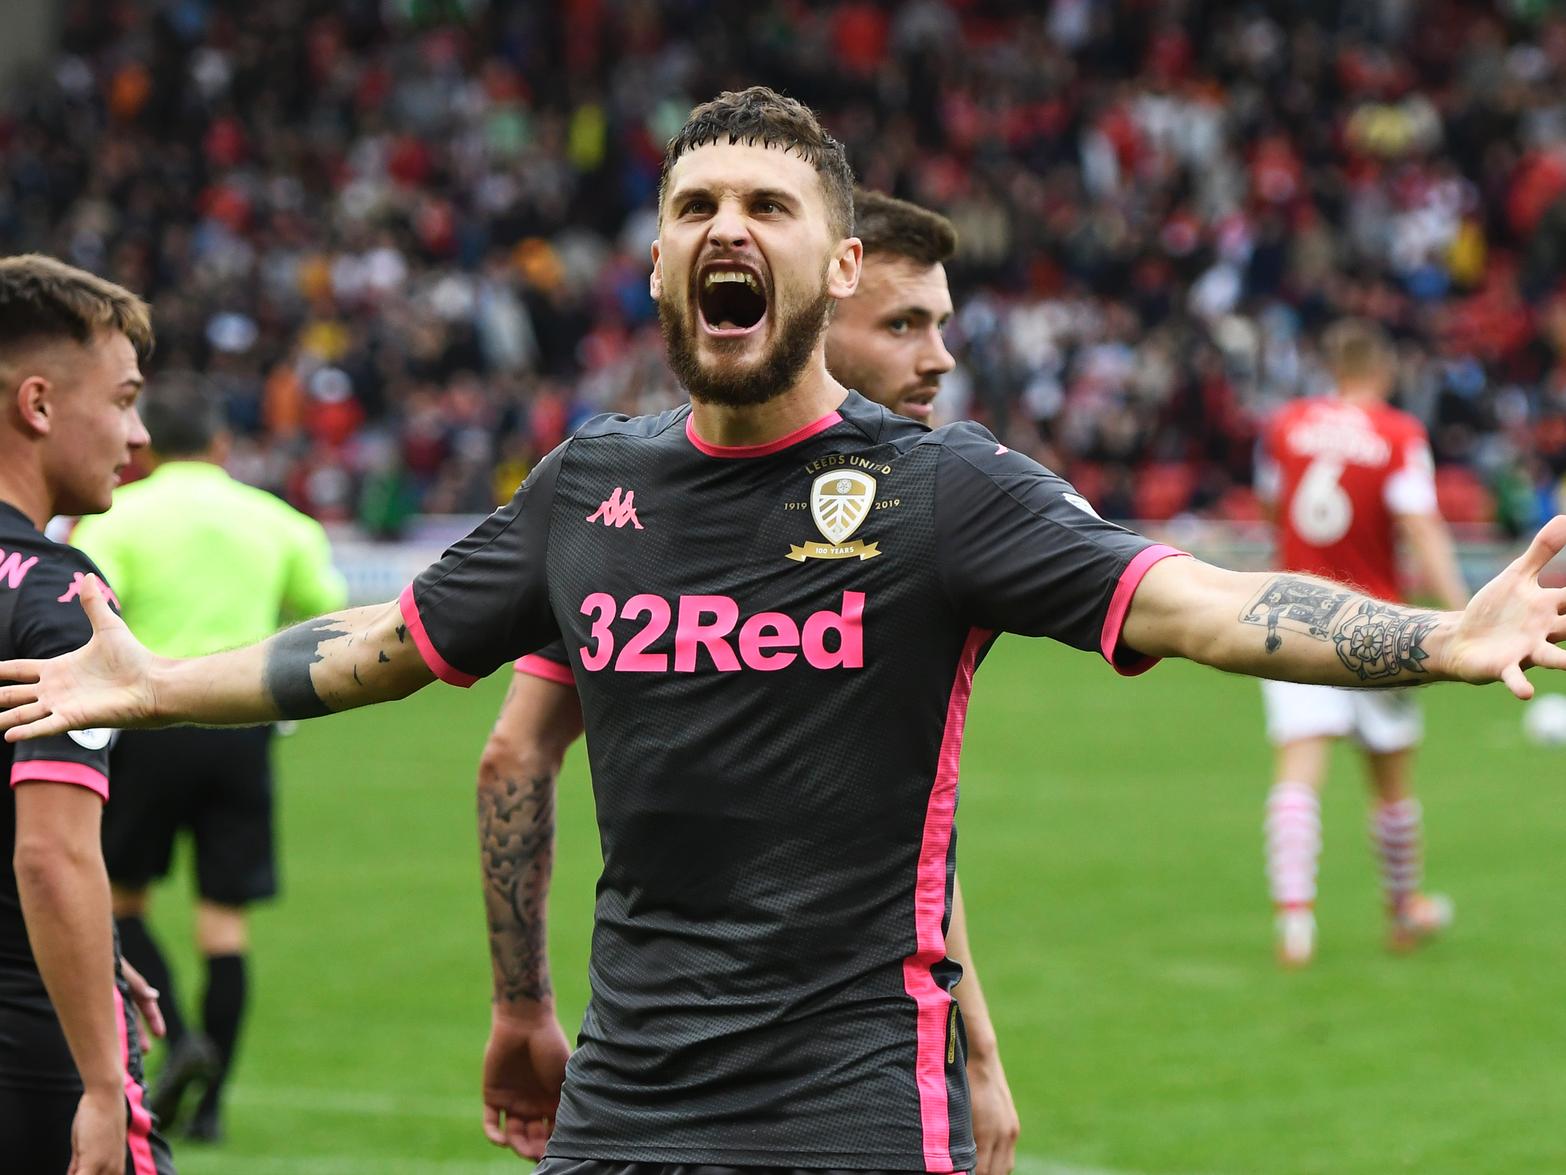 Leeds United are believed to be moving closer to ending the uncertainty over star midfielder Mateusz Klich's future, with the player said to have agreed terms on a lucrative new contract. (Football Insider)